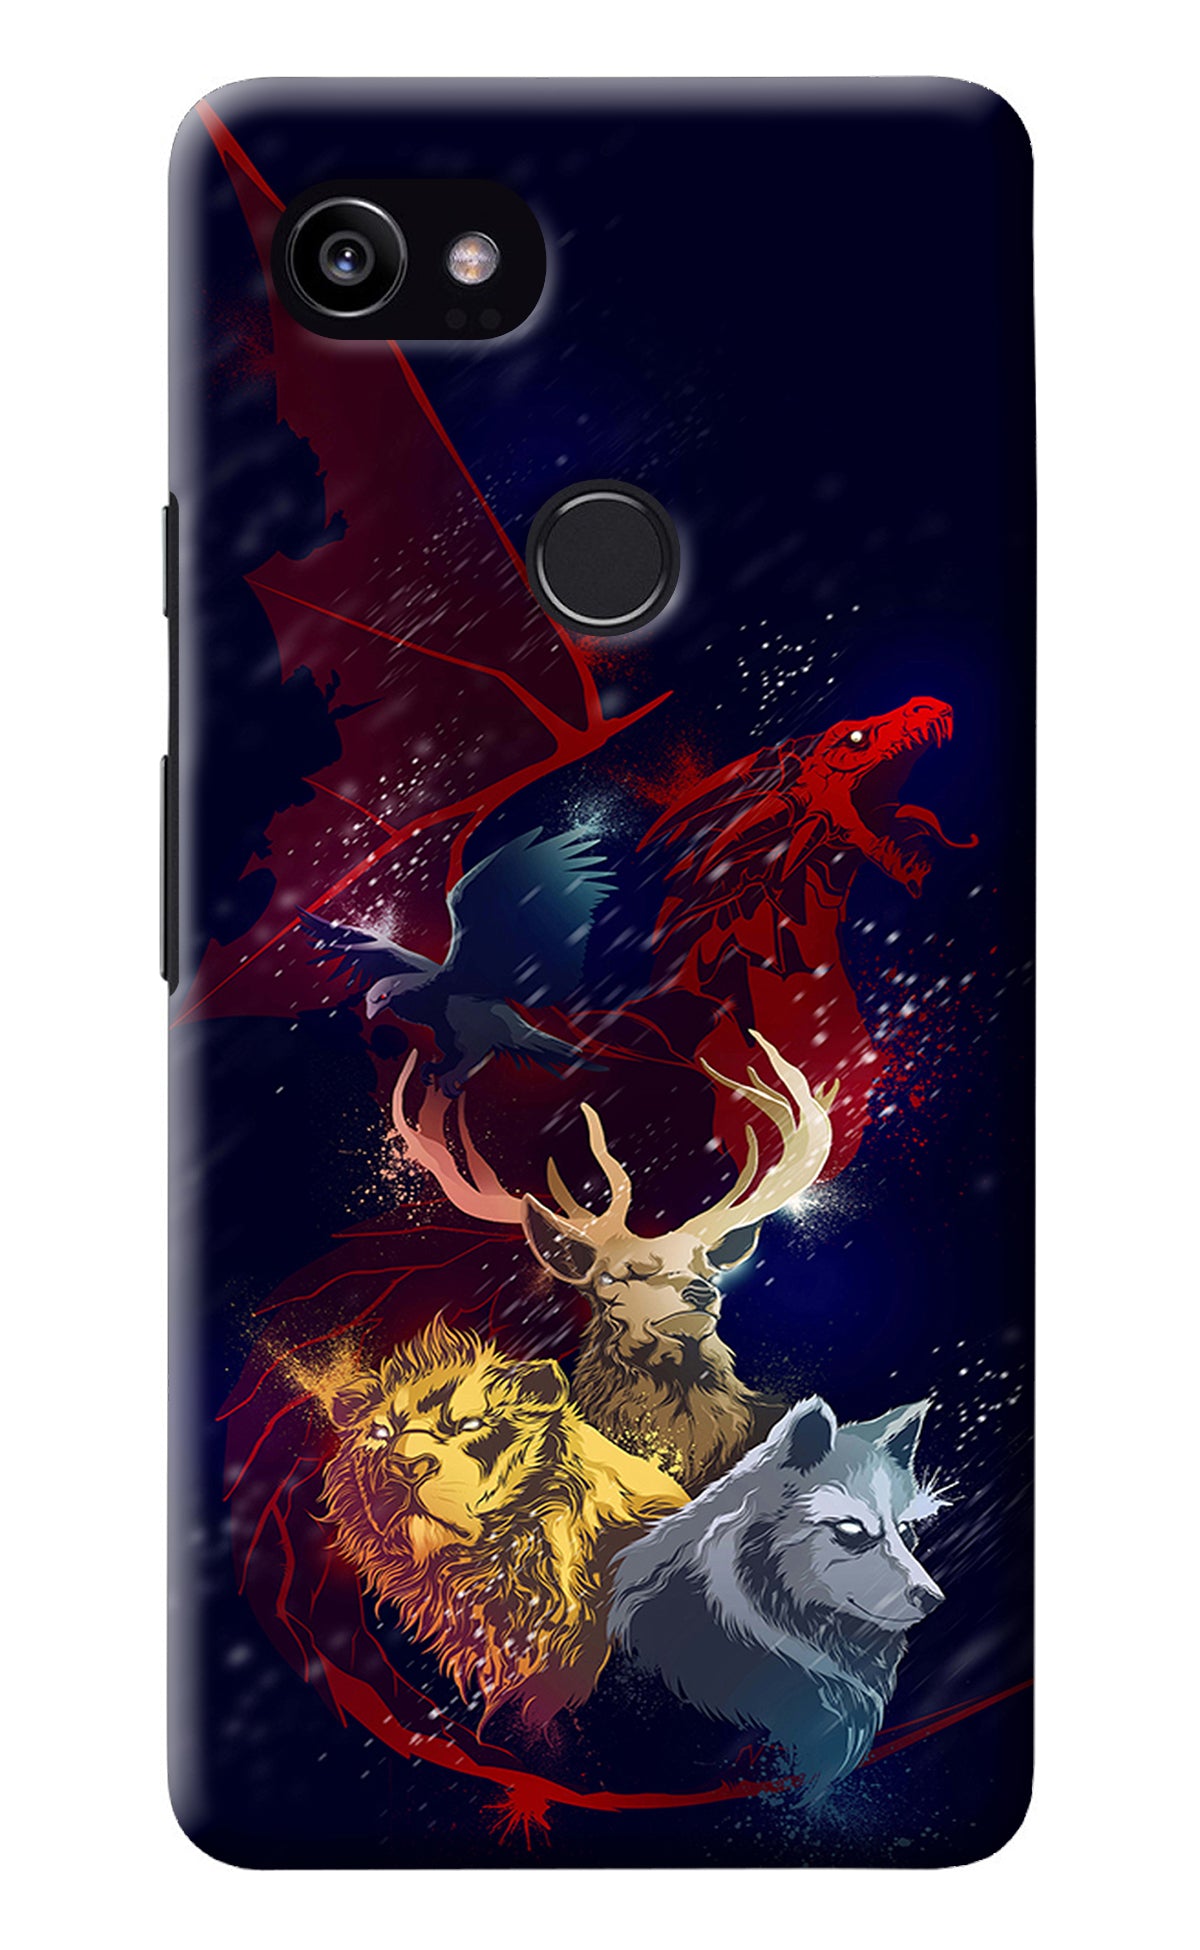 Game Of Thrones Google Pixel 2 XL Back Cover